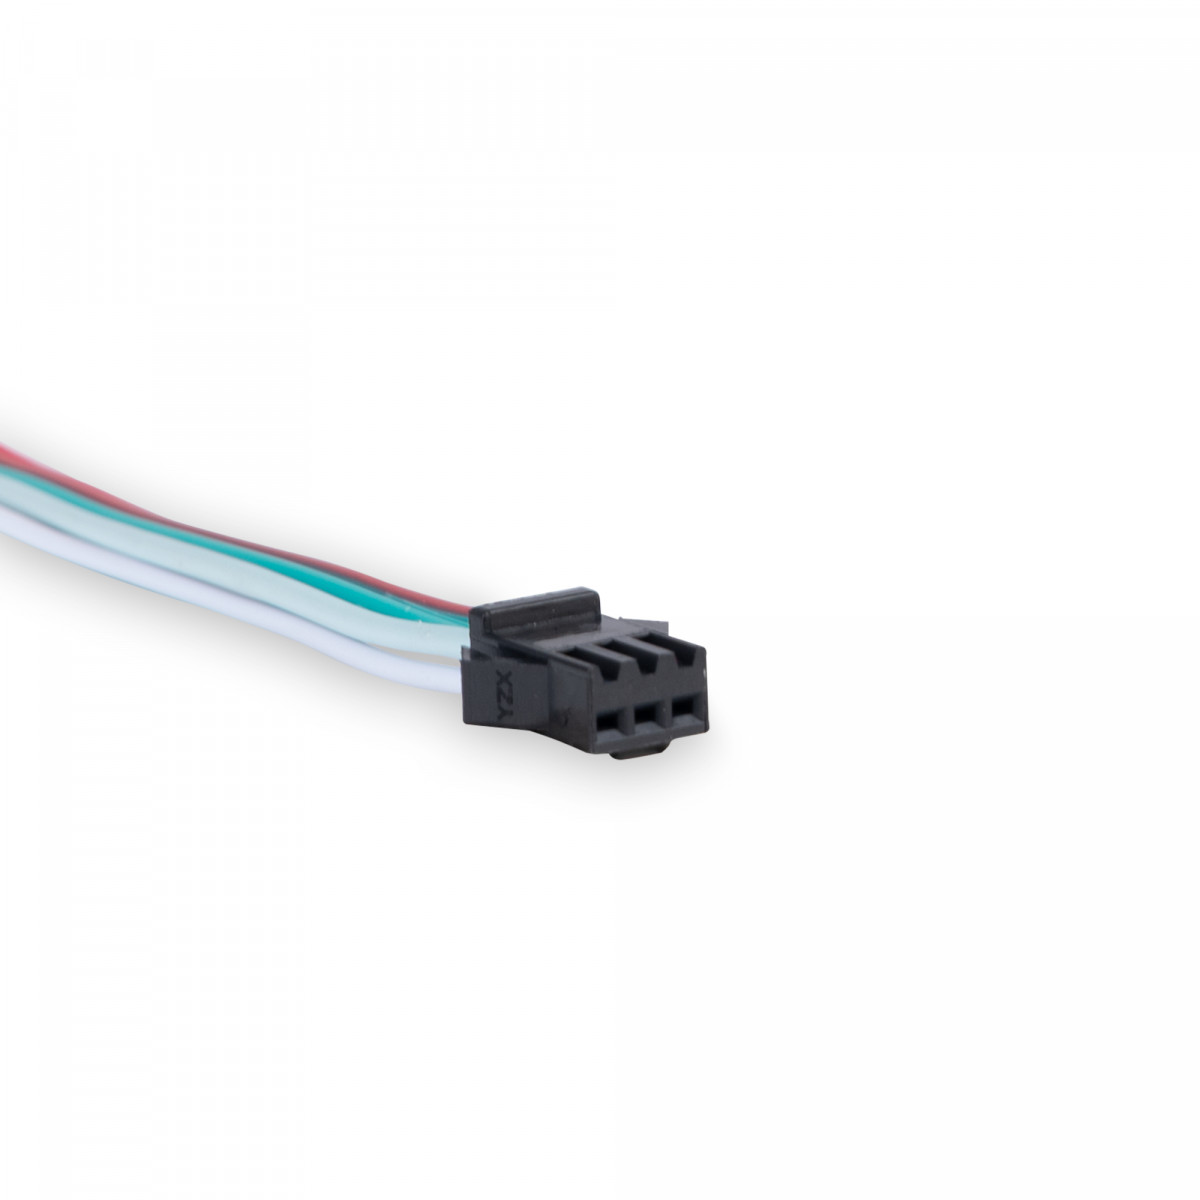 Male quick connector for IC digital LED strip - 5-24V DC